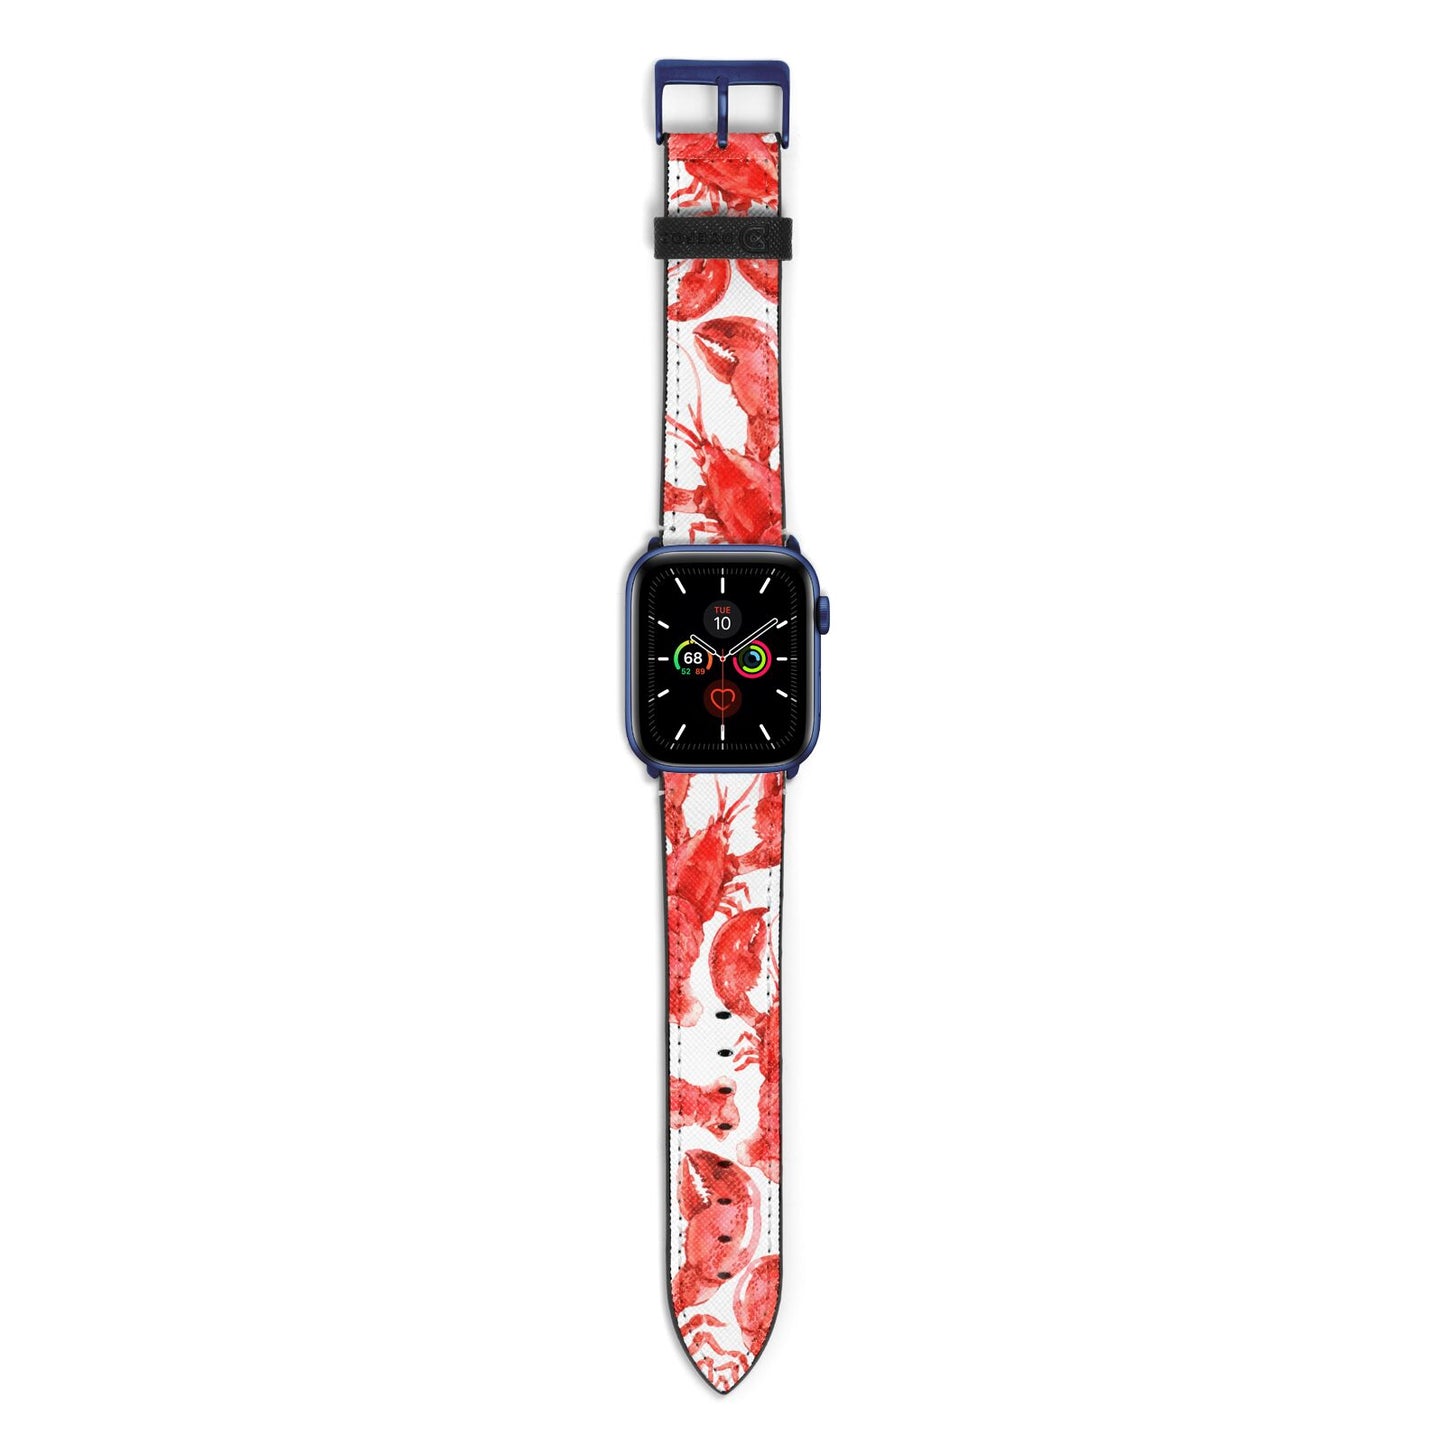 Lobster Apple Watch Strap with Blue Hardware